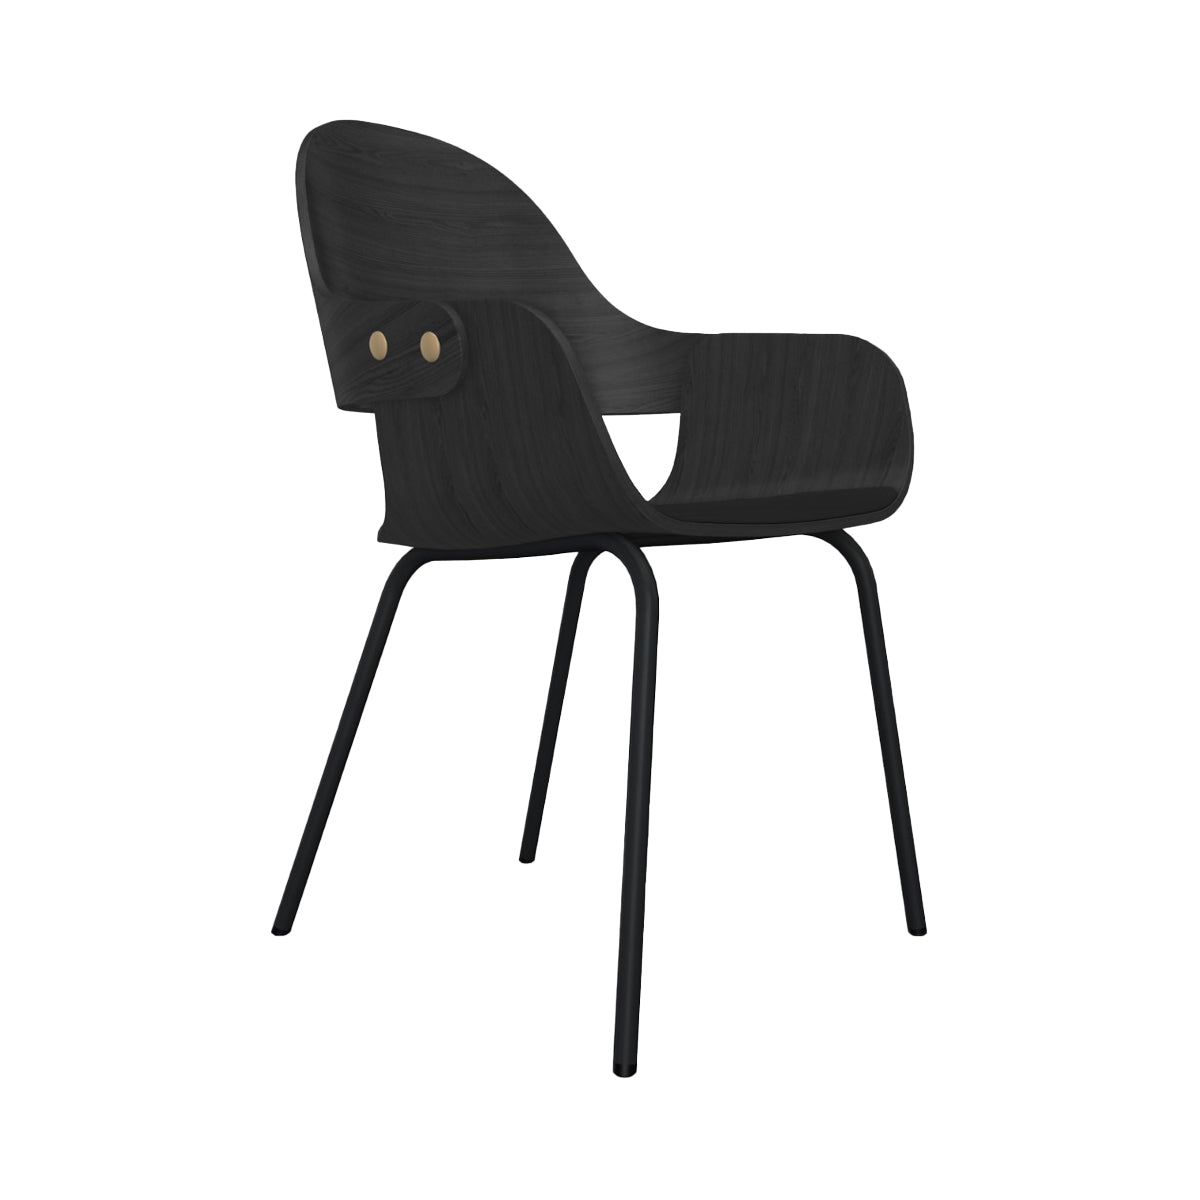 Showtime Nude Chair with Metal Base: Seat Upholstered + Ash Stained Black + Anthracite Grey